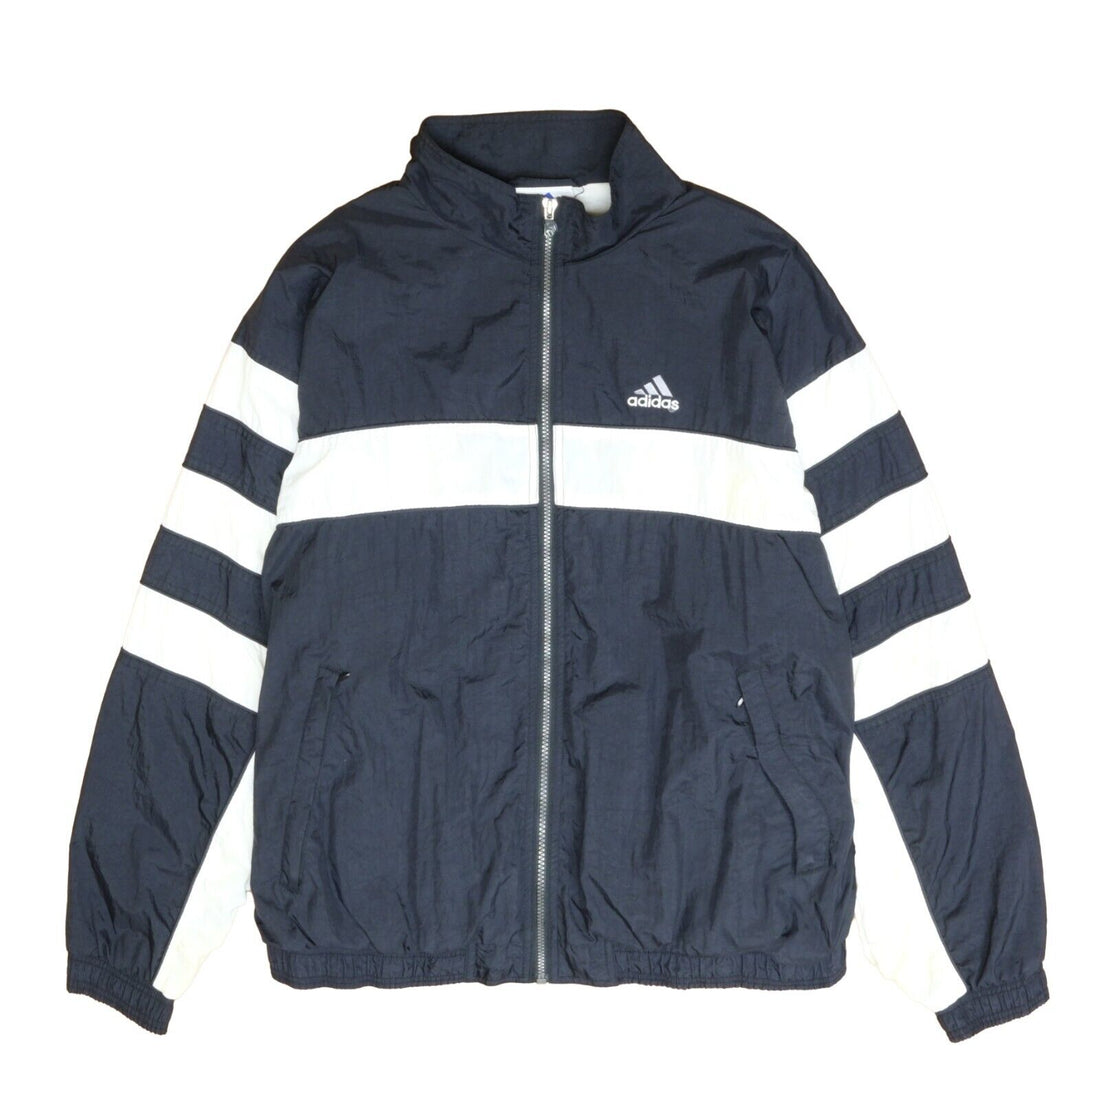 Vintage Adidas Jacket From the 80s L -  Finland